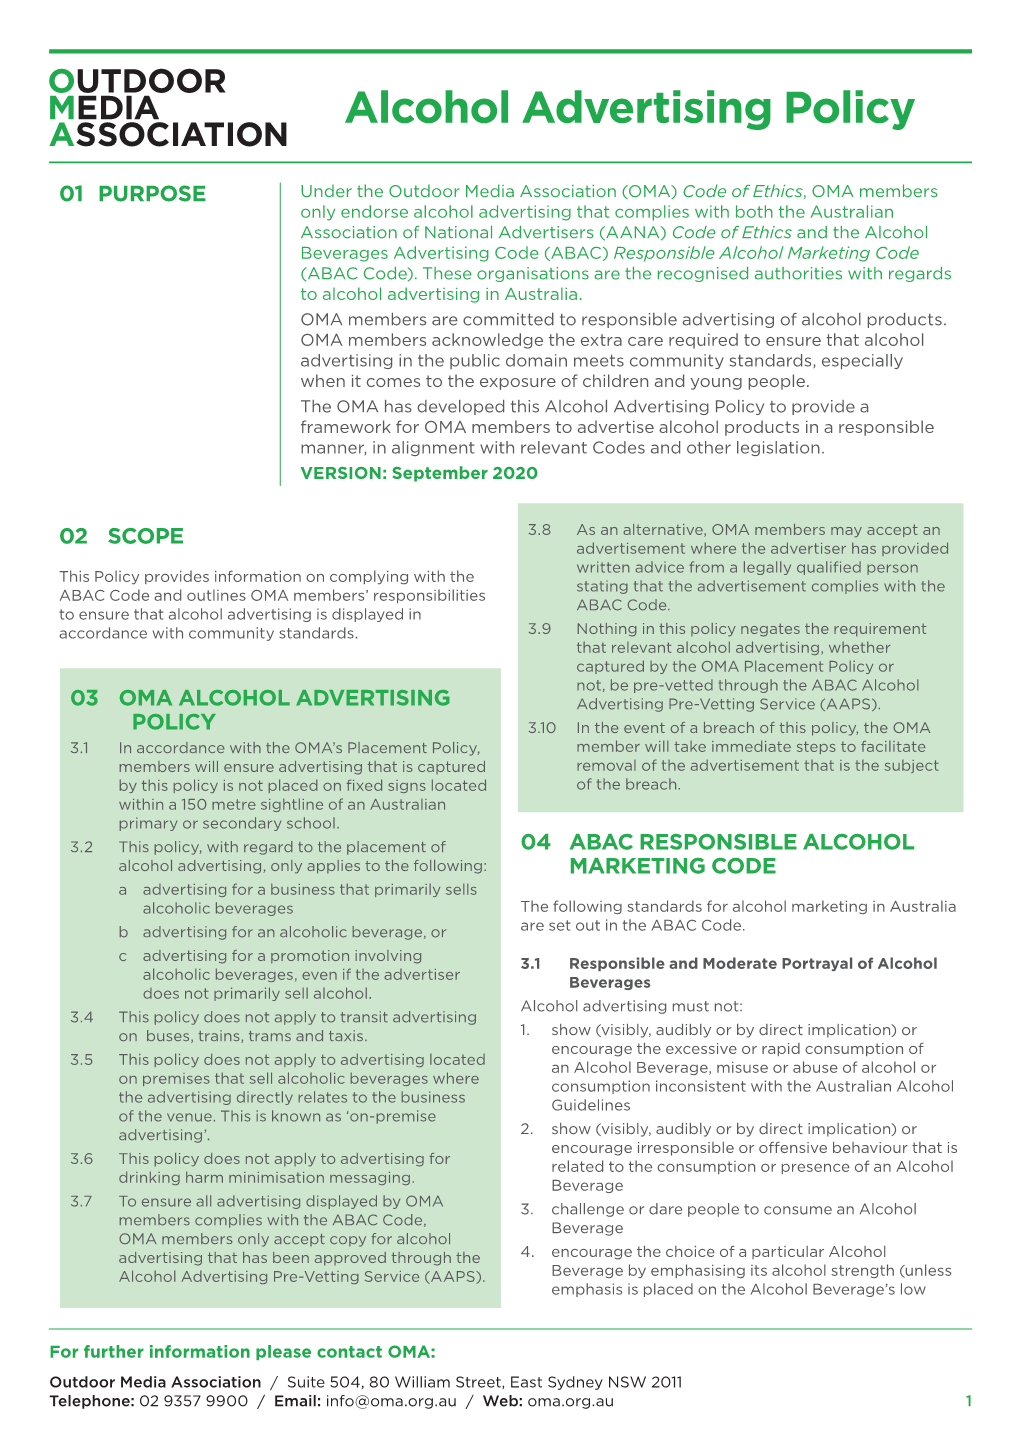 Alcohol Advertising Policy September 2020